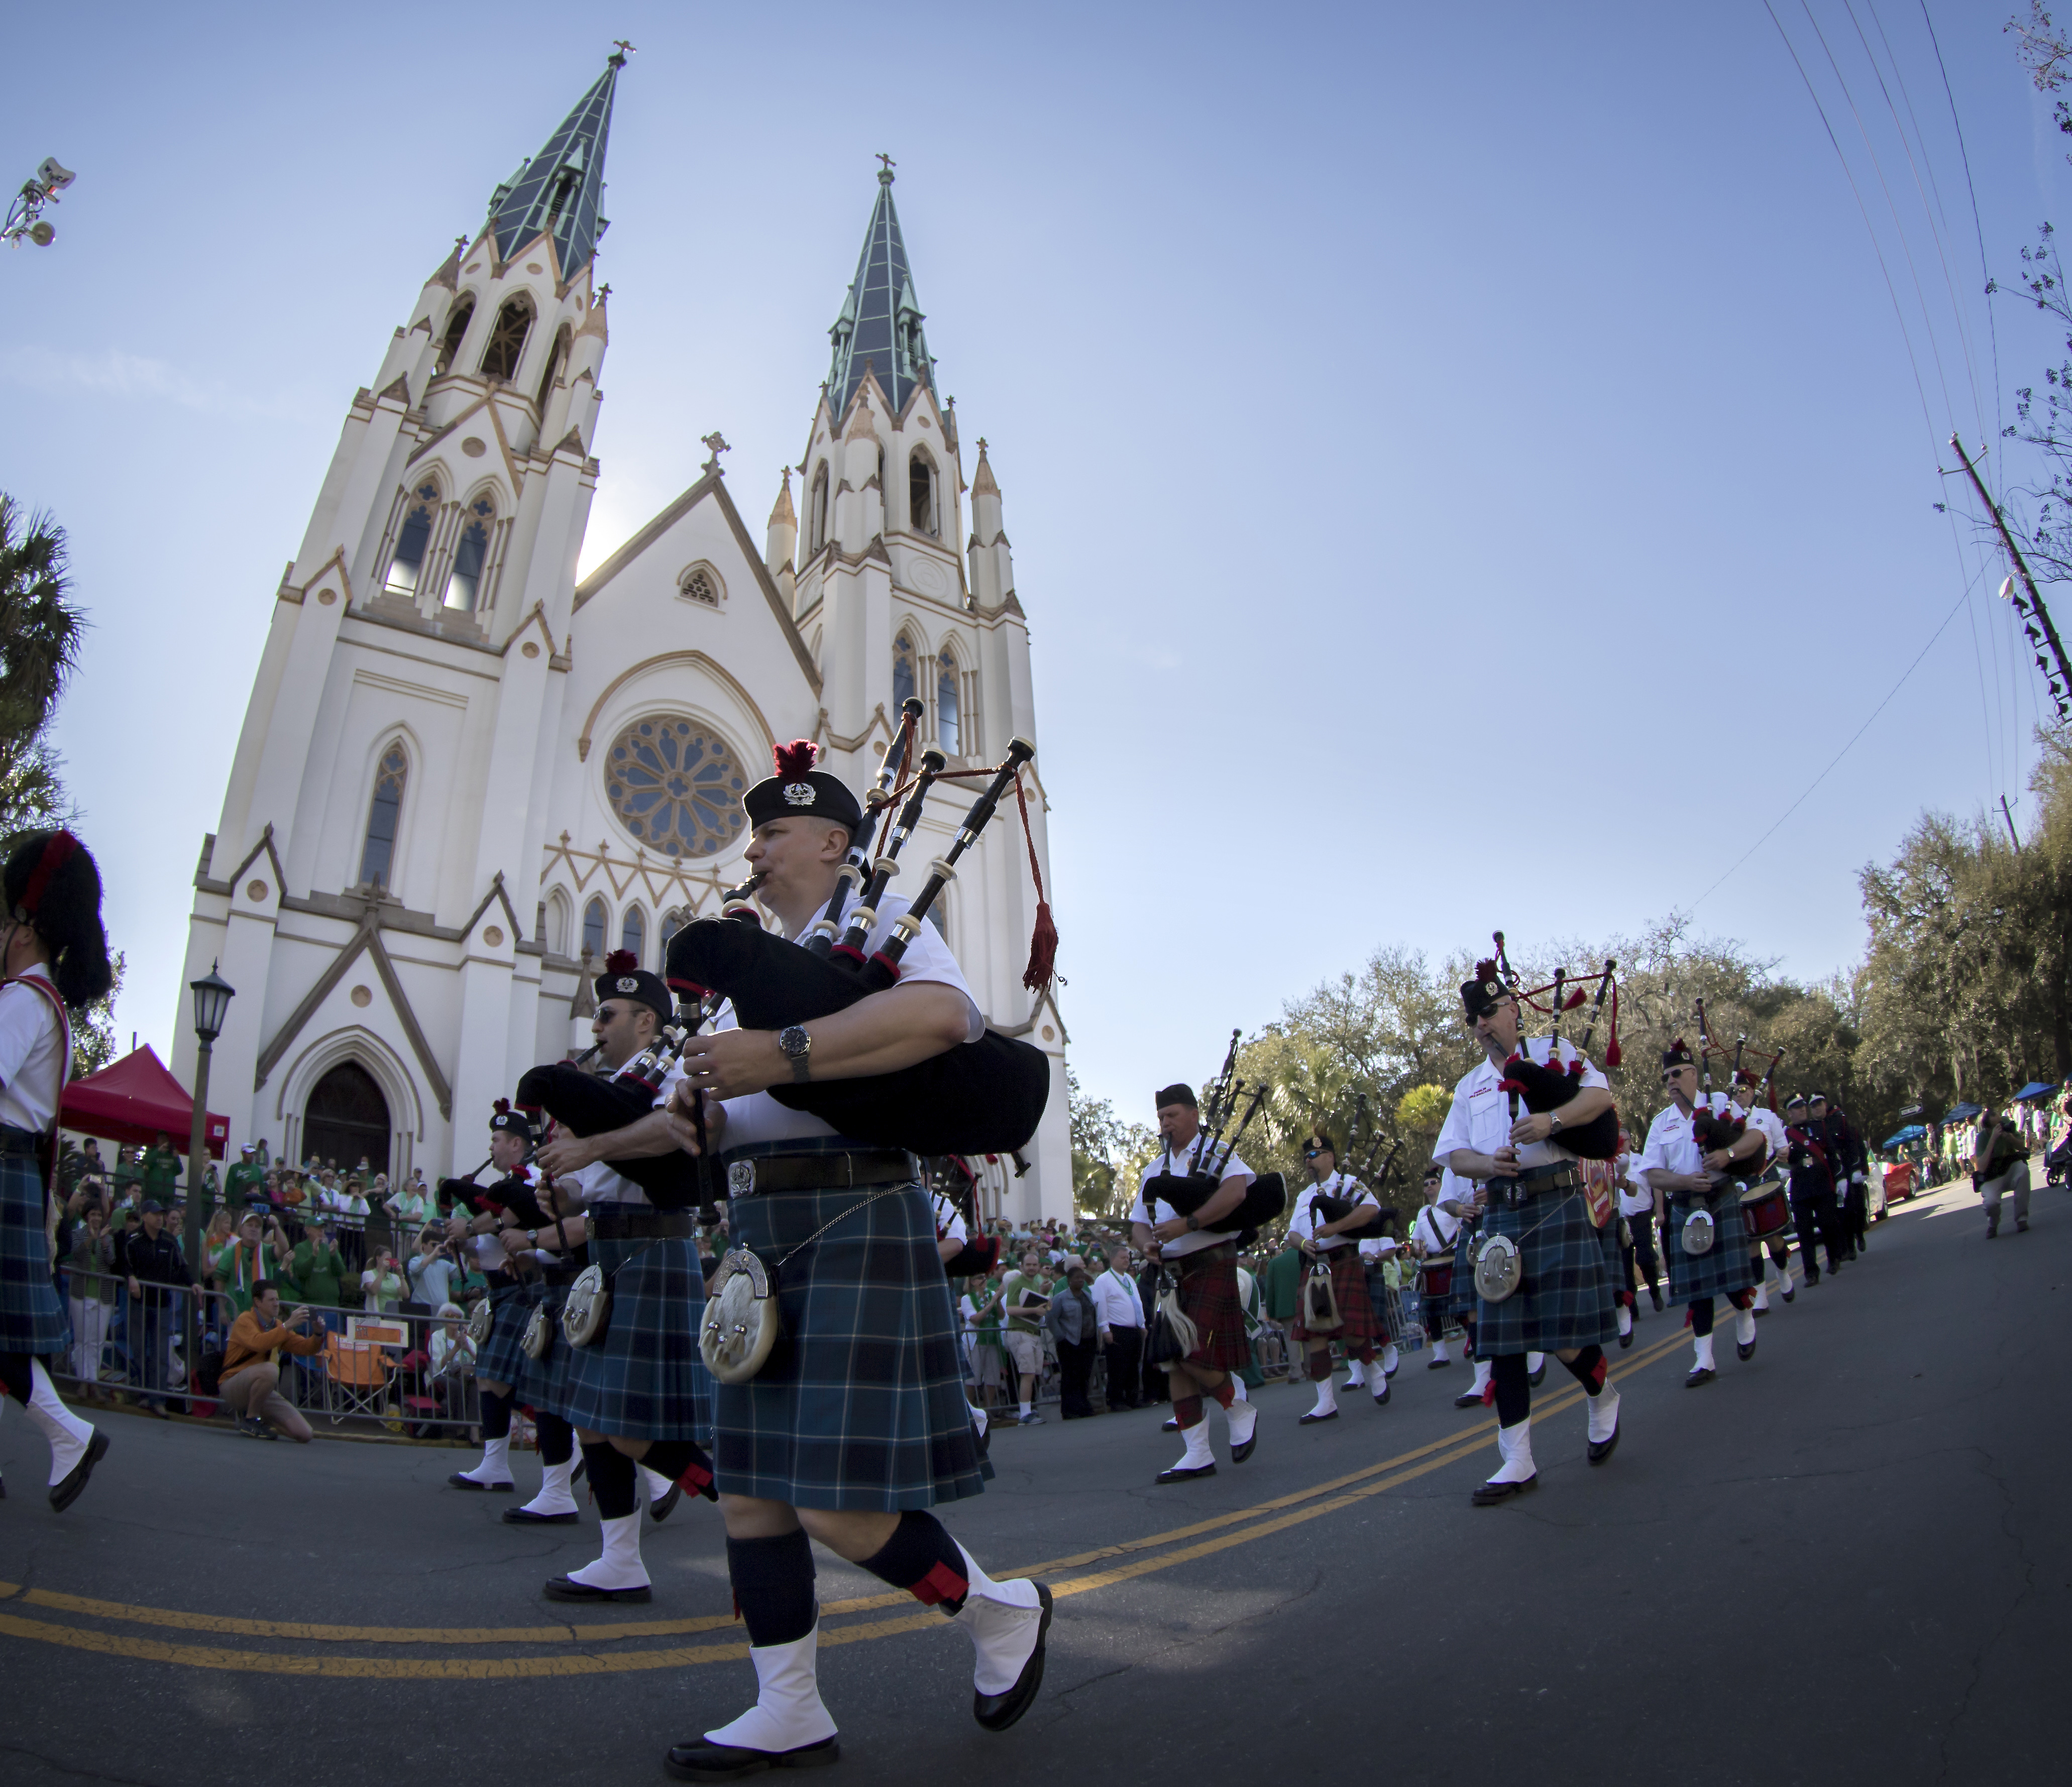 FILE- In this March 17, 2015 file photo members of the Dublin Fire Brigade Pipe Band perform while marching past The Cathedral of St. John The Baptist during the St. Patrick's Day parade in Savannah, Ga. Vice President Mike Pence is planning to attend Savannah's St. Patrick's Day parade. (AP Photo/Stephen B. Morton, File)